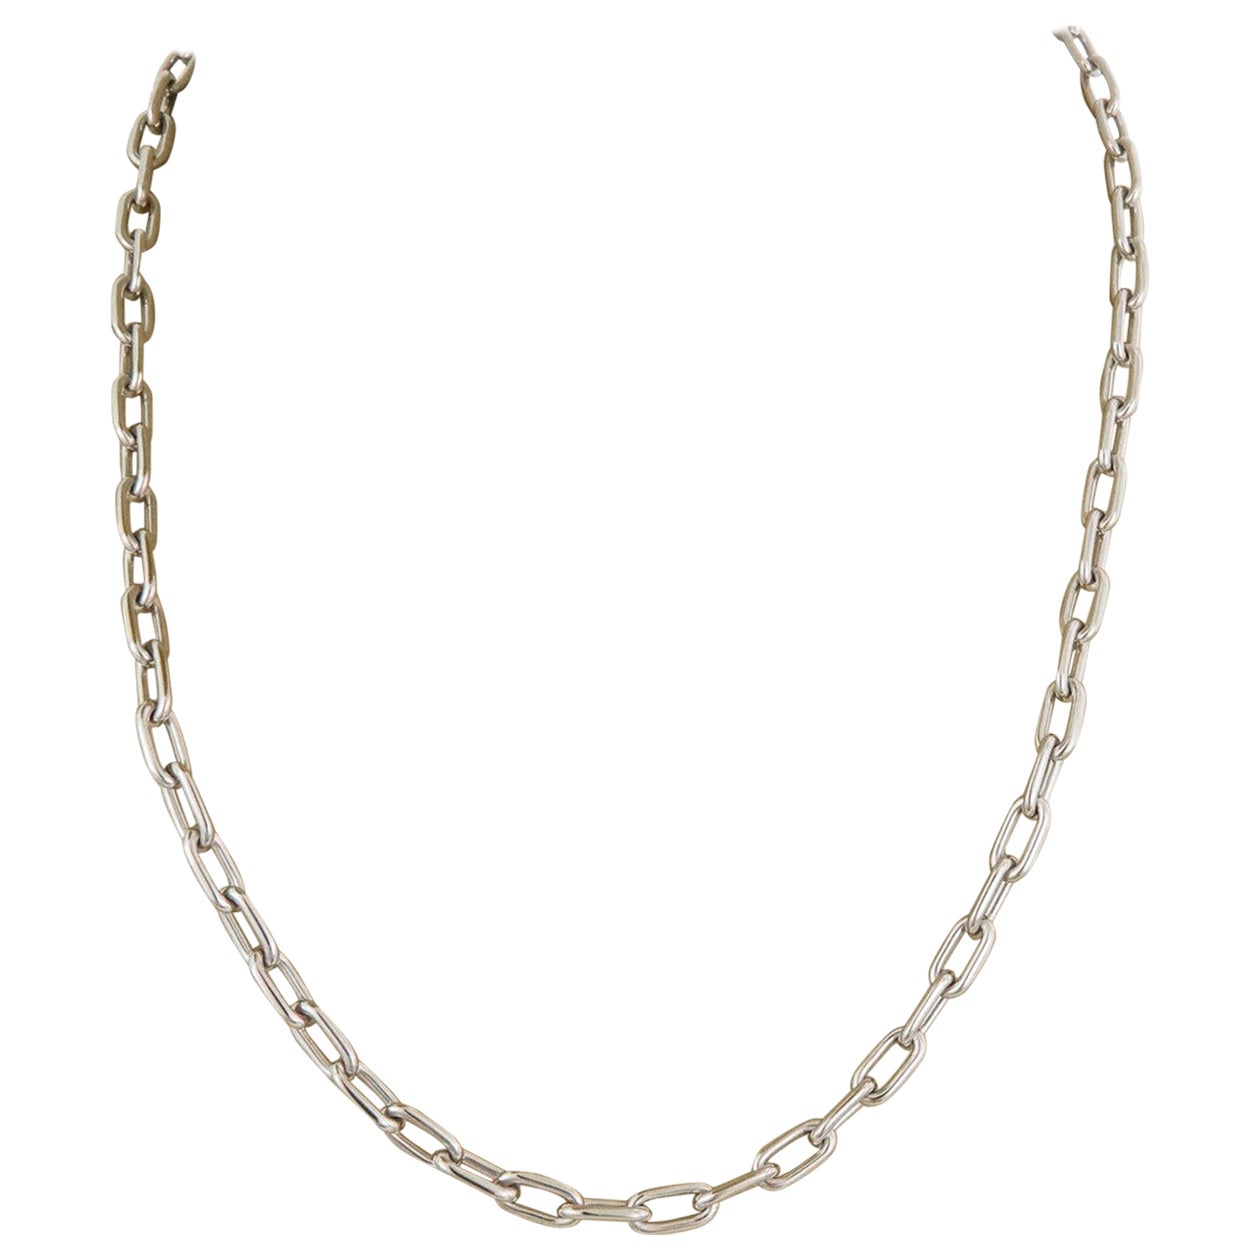 Cartier Spartacus 18k White Gold Oval Link Chain Necklace 